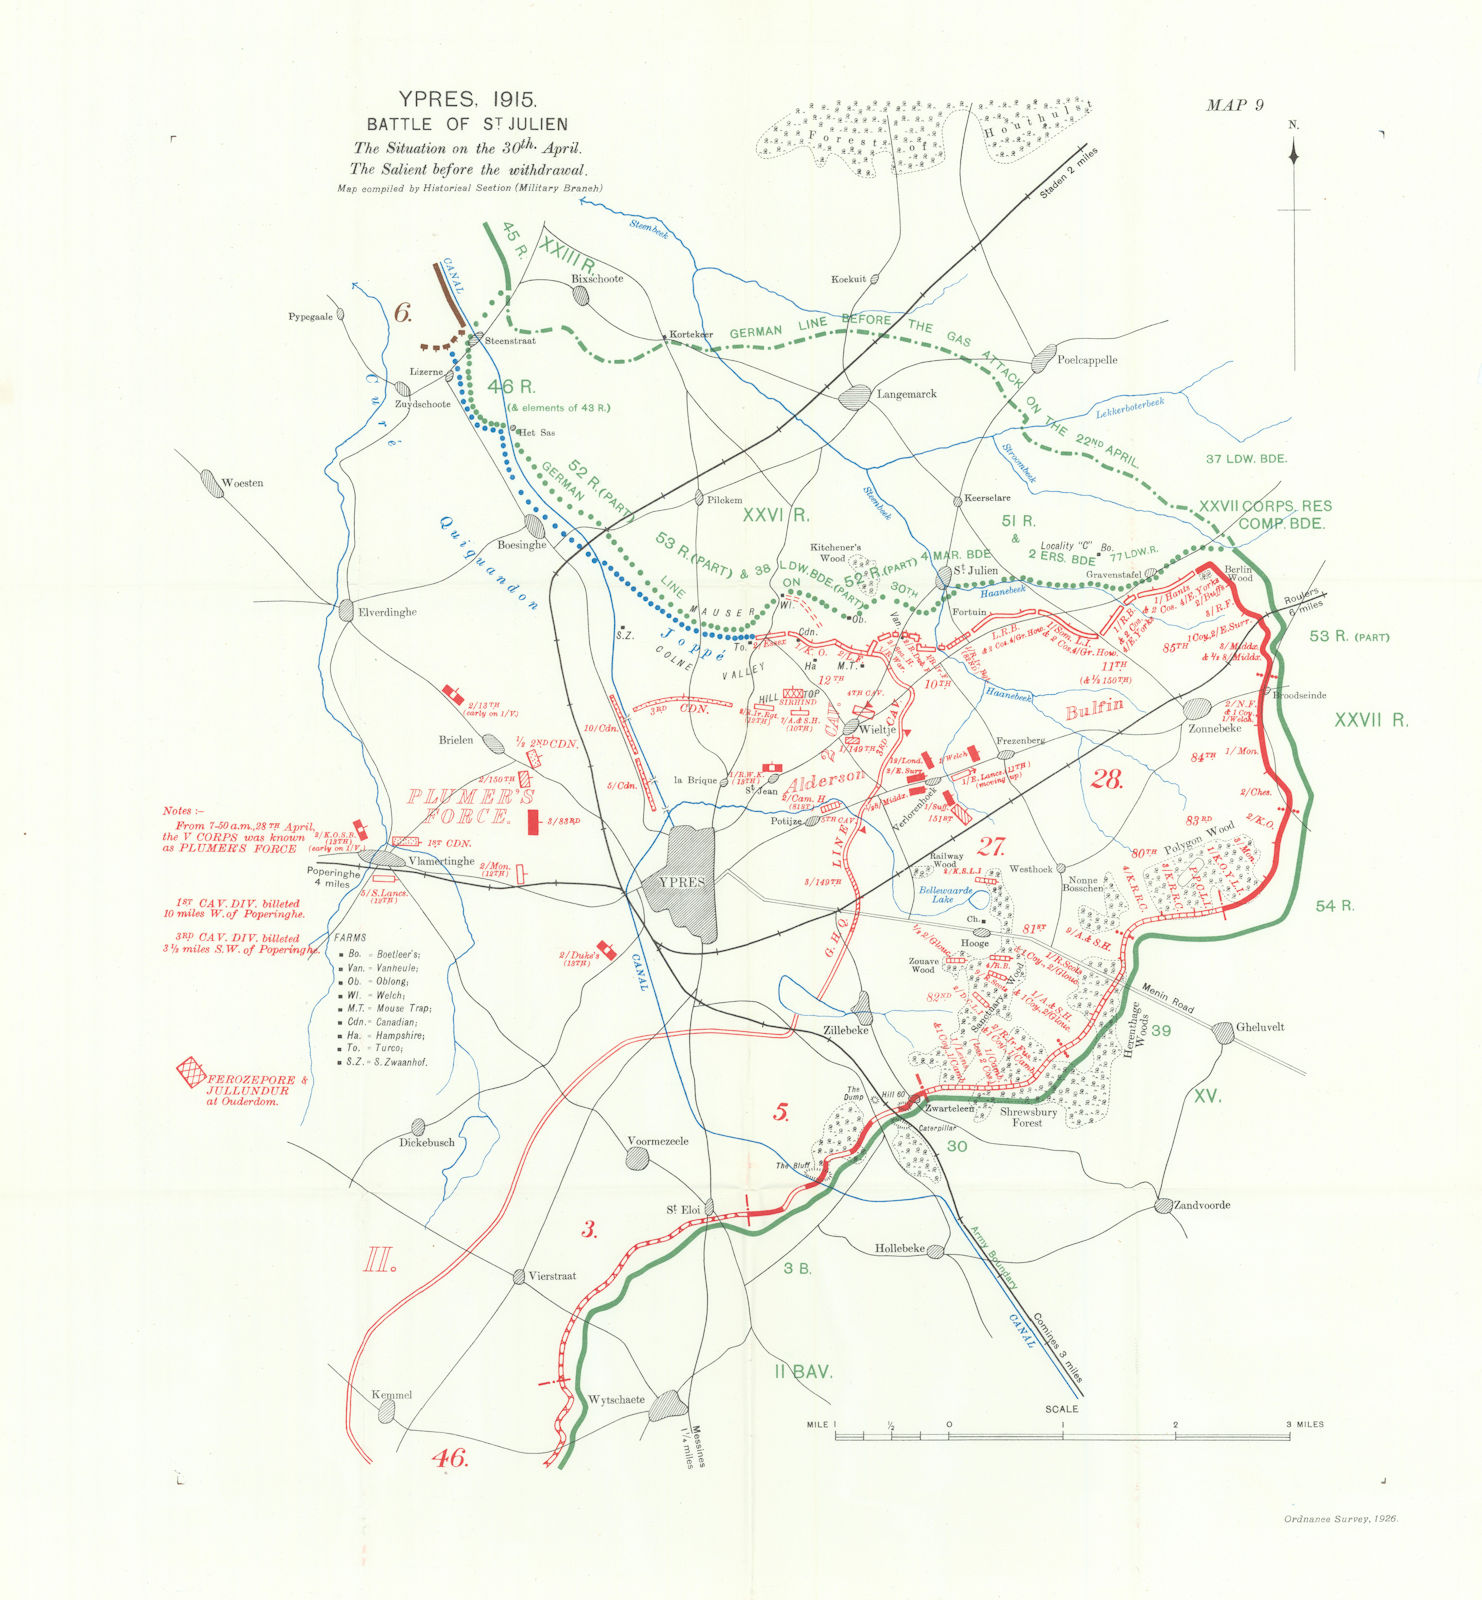 Battle of St Julien 30th April 1915. Ypres Salient pre-withdrawal. WW1. 1928 map